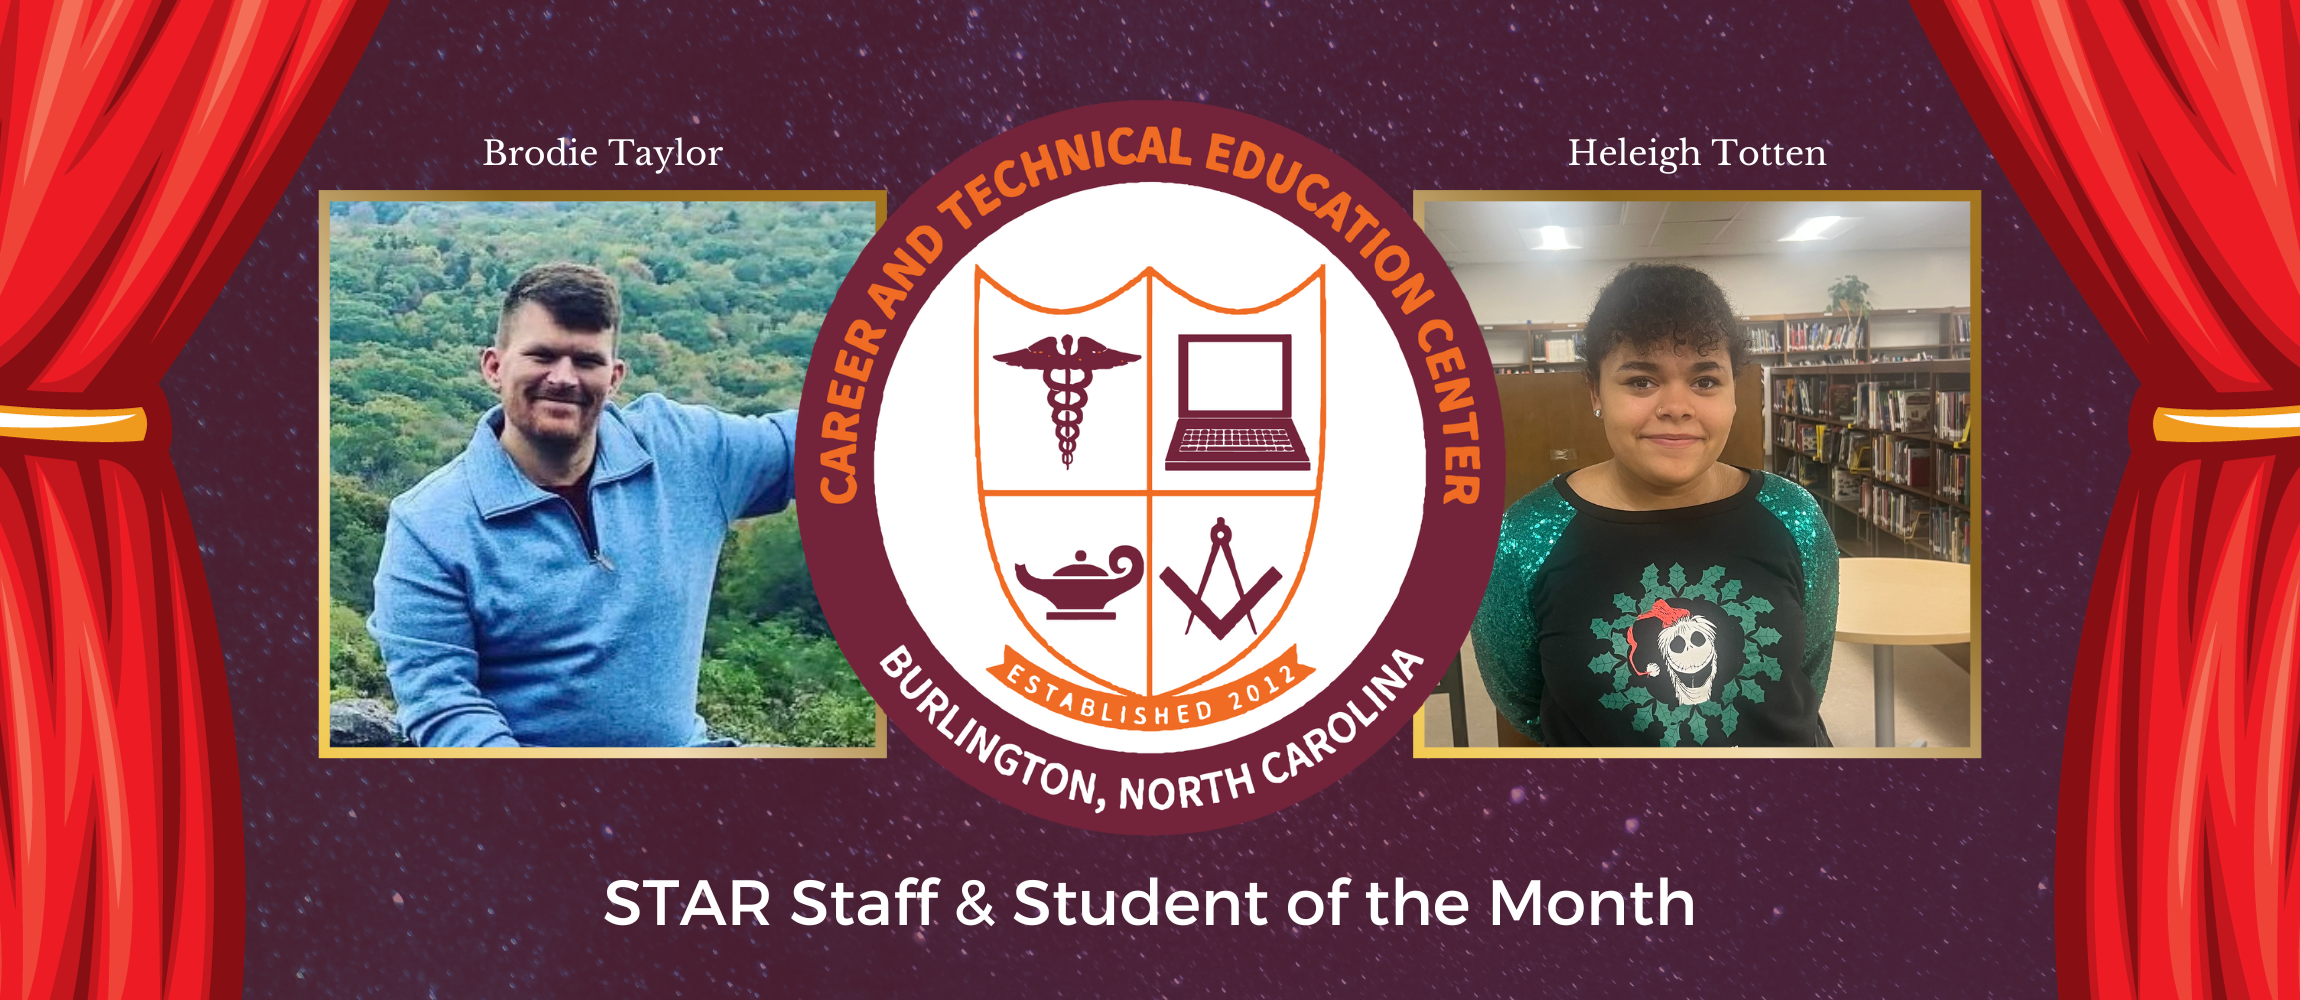 Star Staff and Student of the Month recognition banner